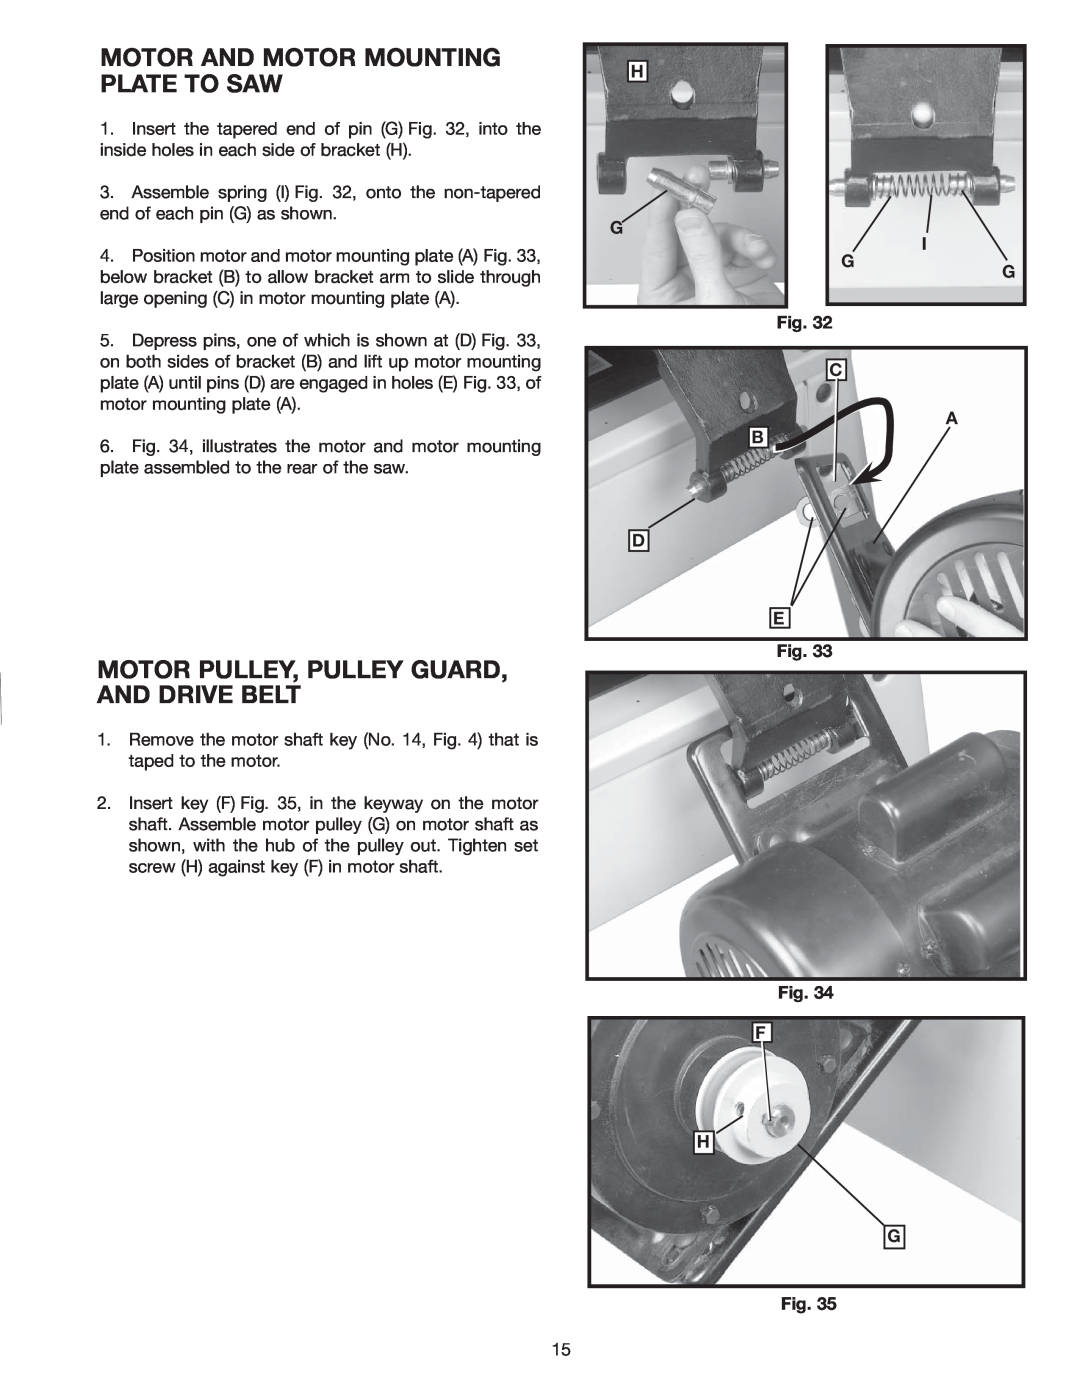 Delta 36-978 instruction manual Motor And Motor Mounting Plate To Saw, Motor Pulley, Pulley Guard, And Drive Belt 